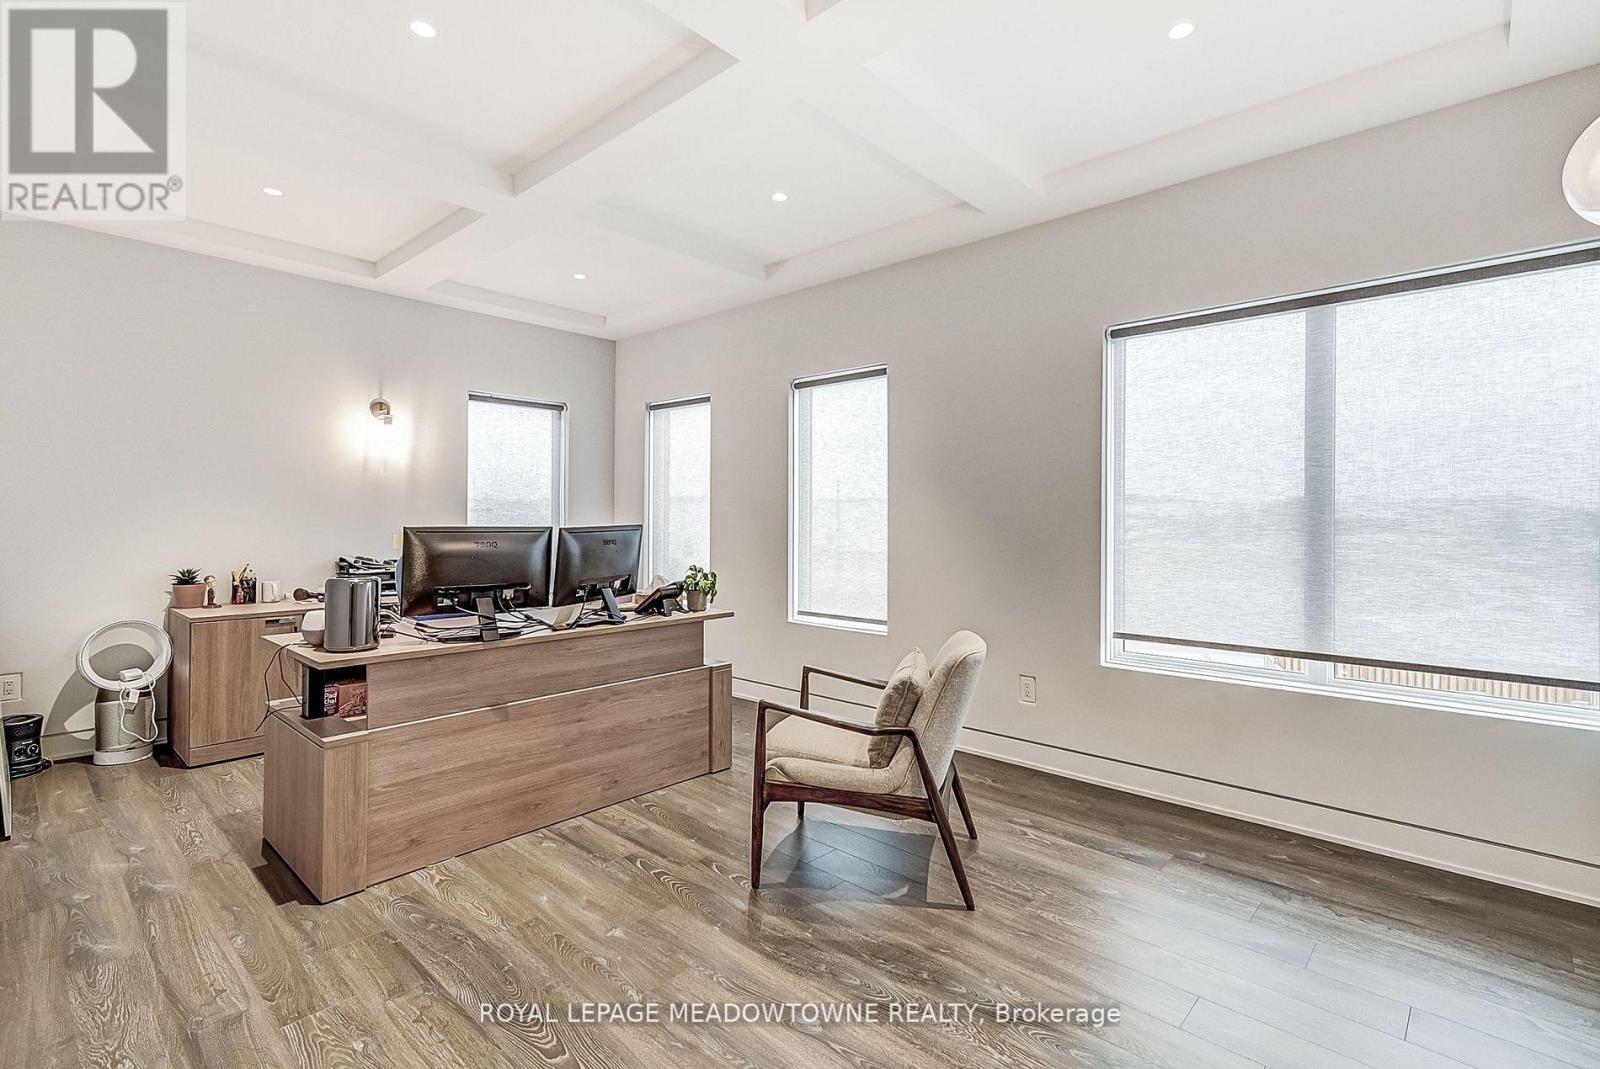 #3-201 -7145 WEST CREDIT AVE, #3-201